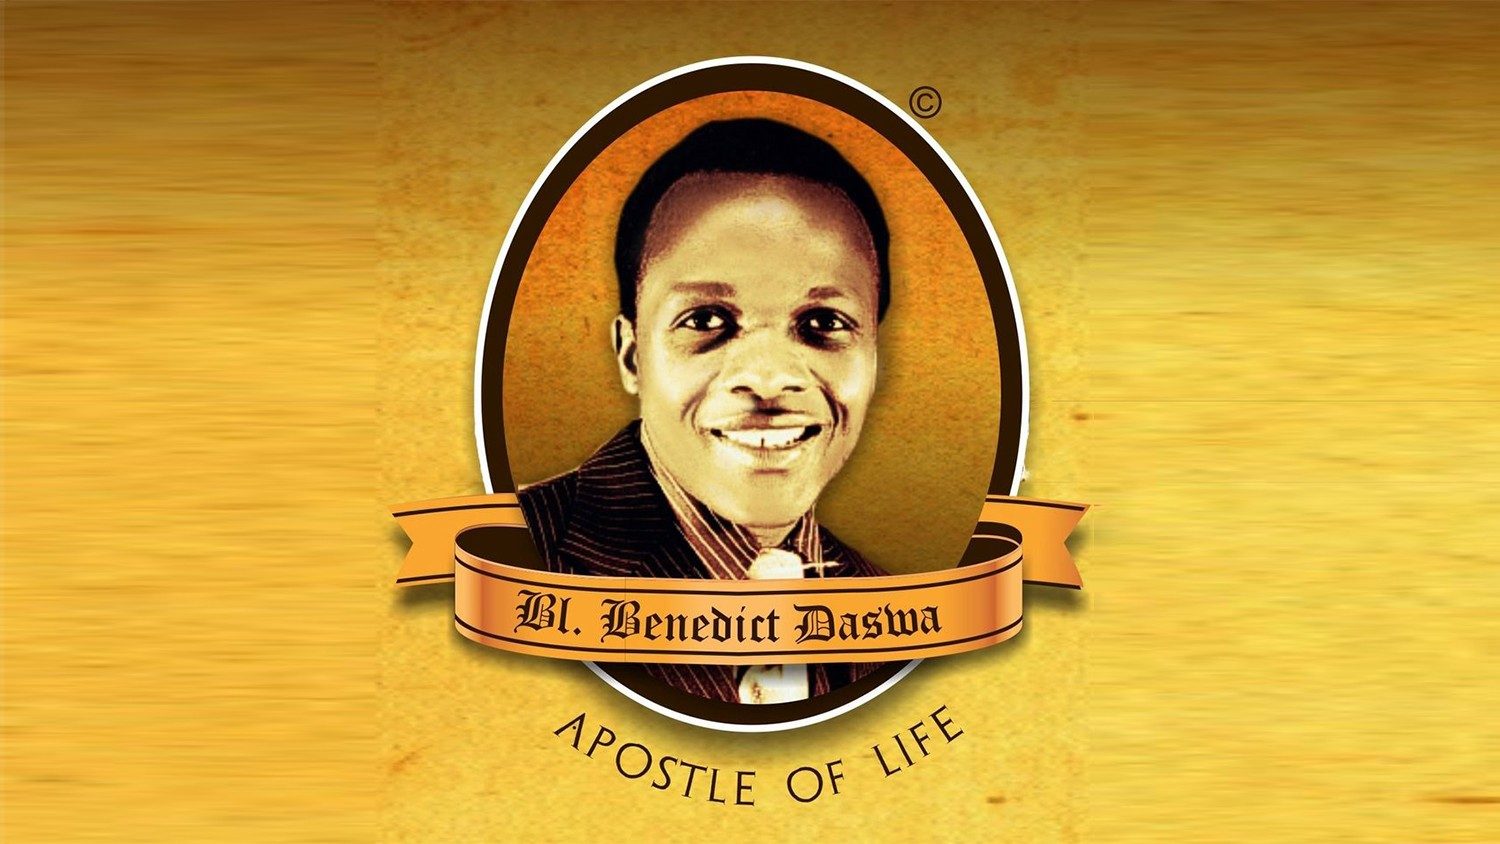 Blessed Benedict Daswa: One important step forward